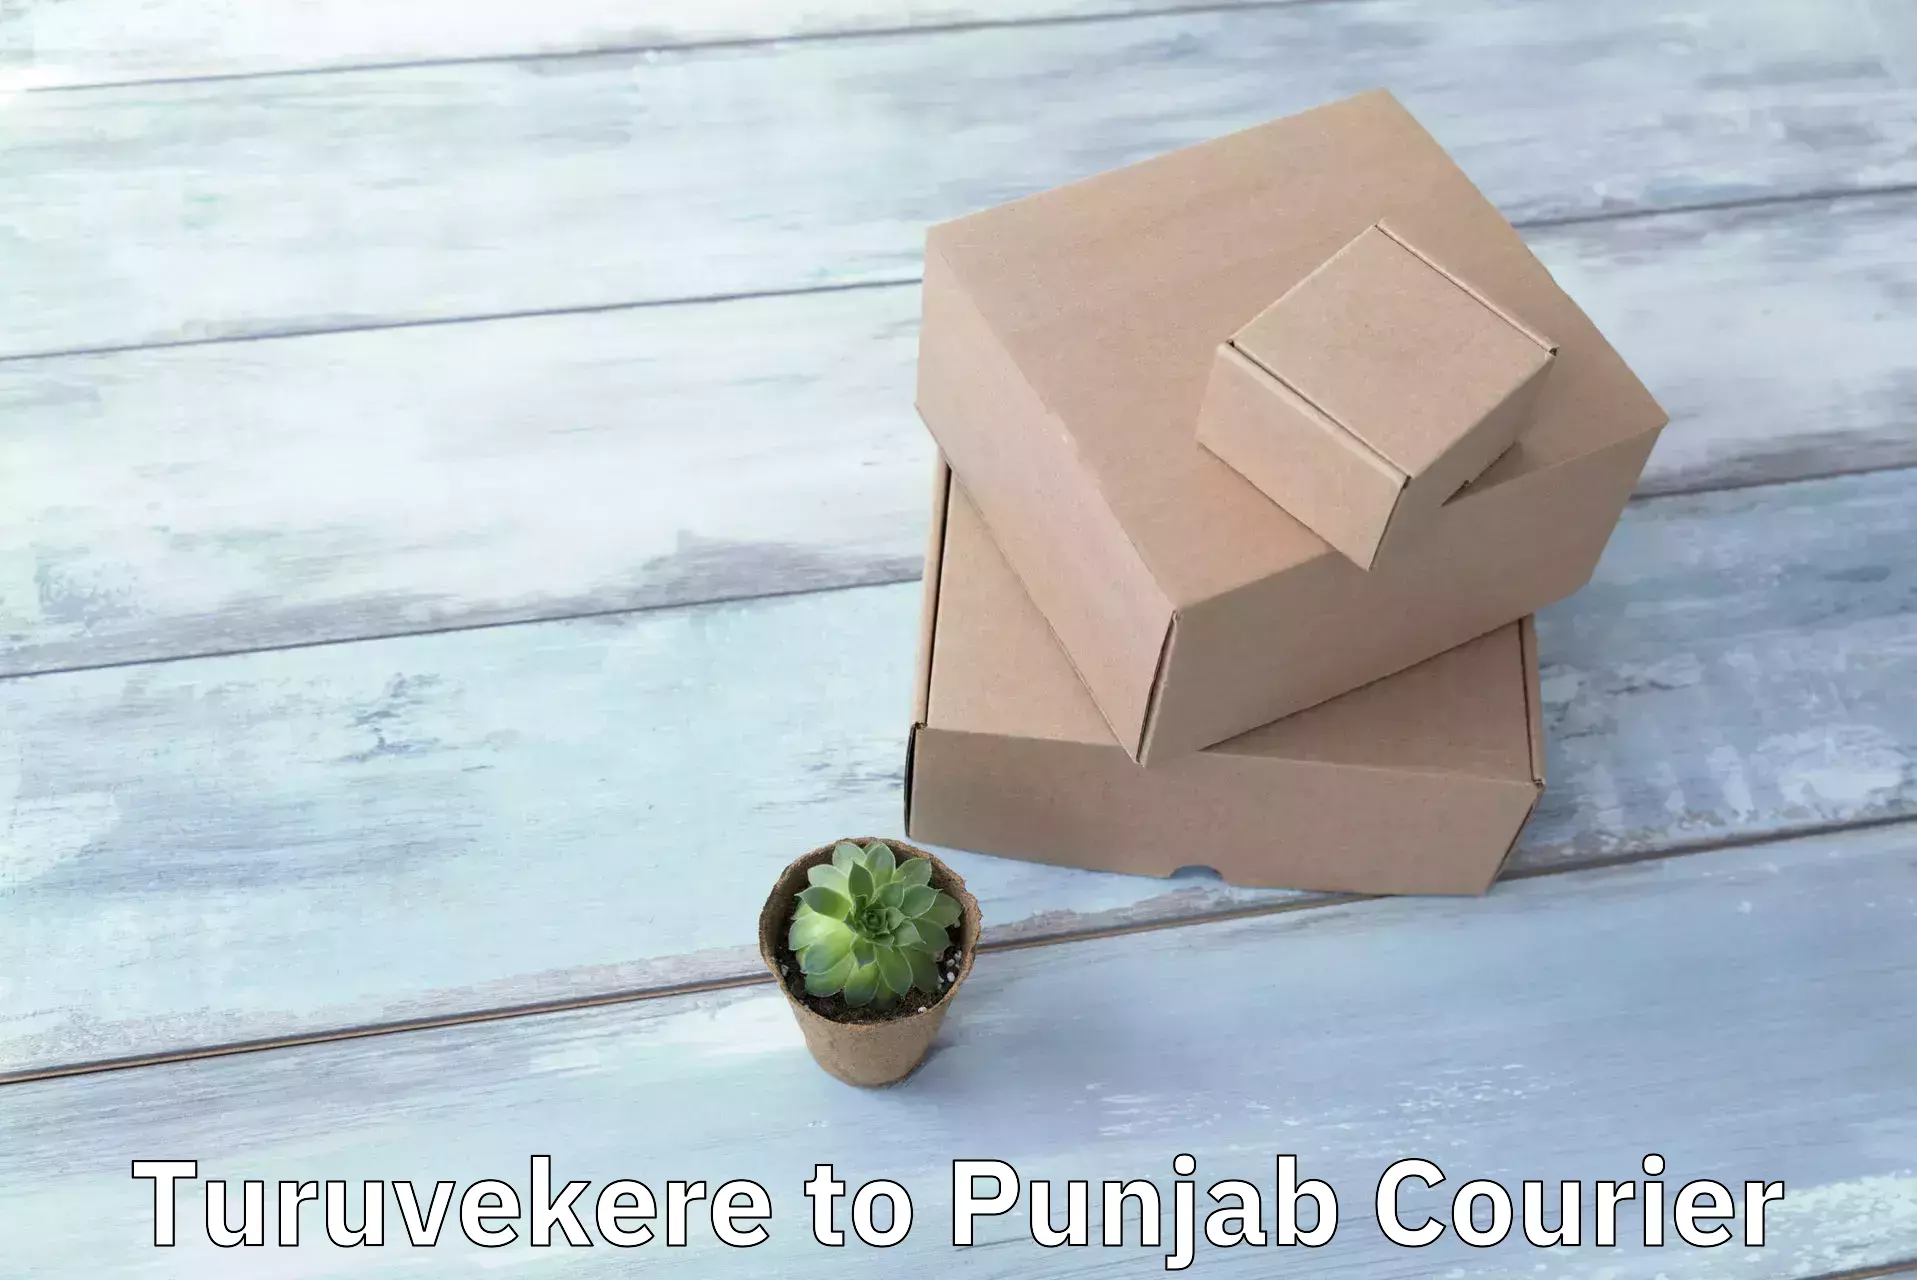 Business delivery service Turuvekere to Punjab